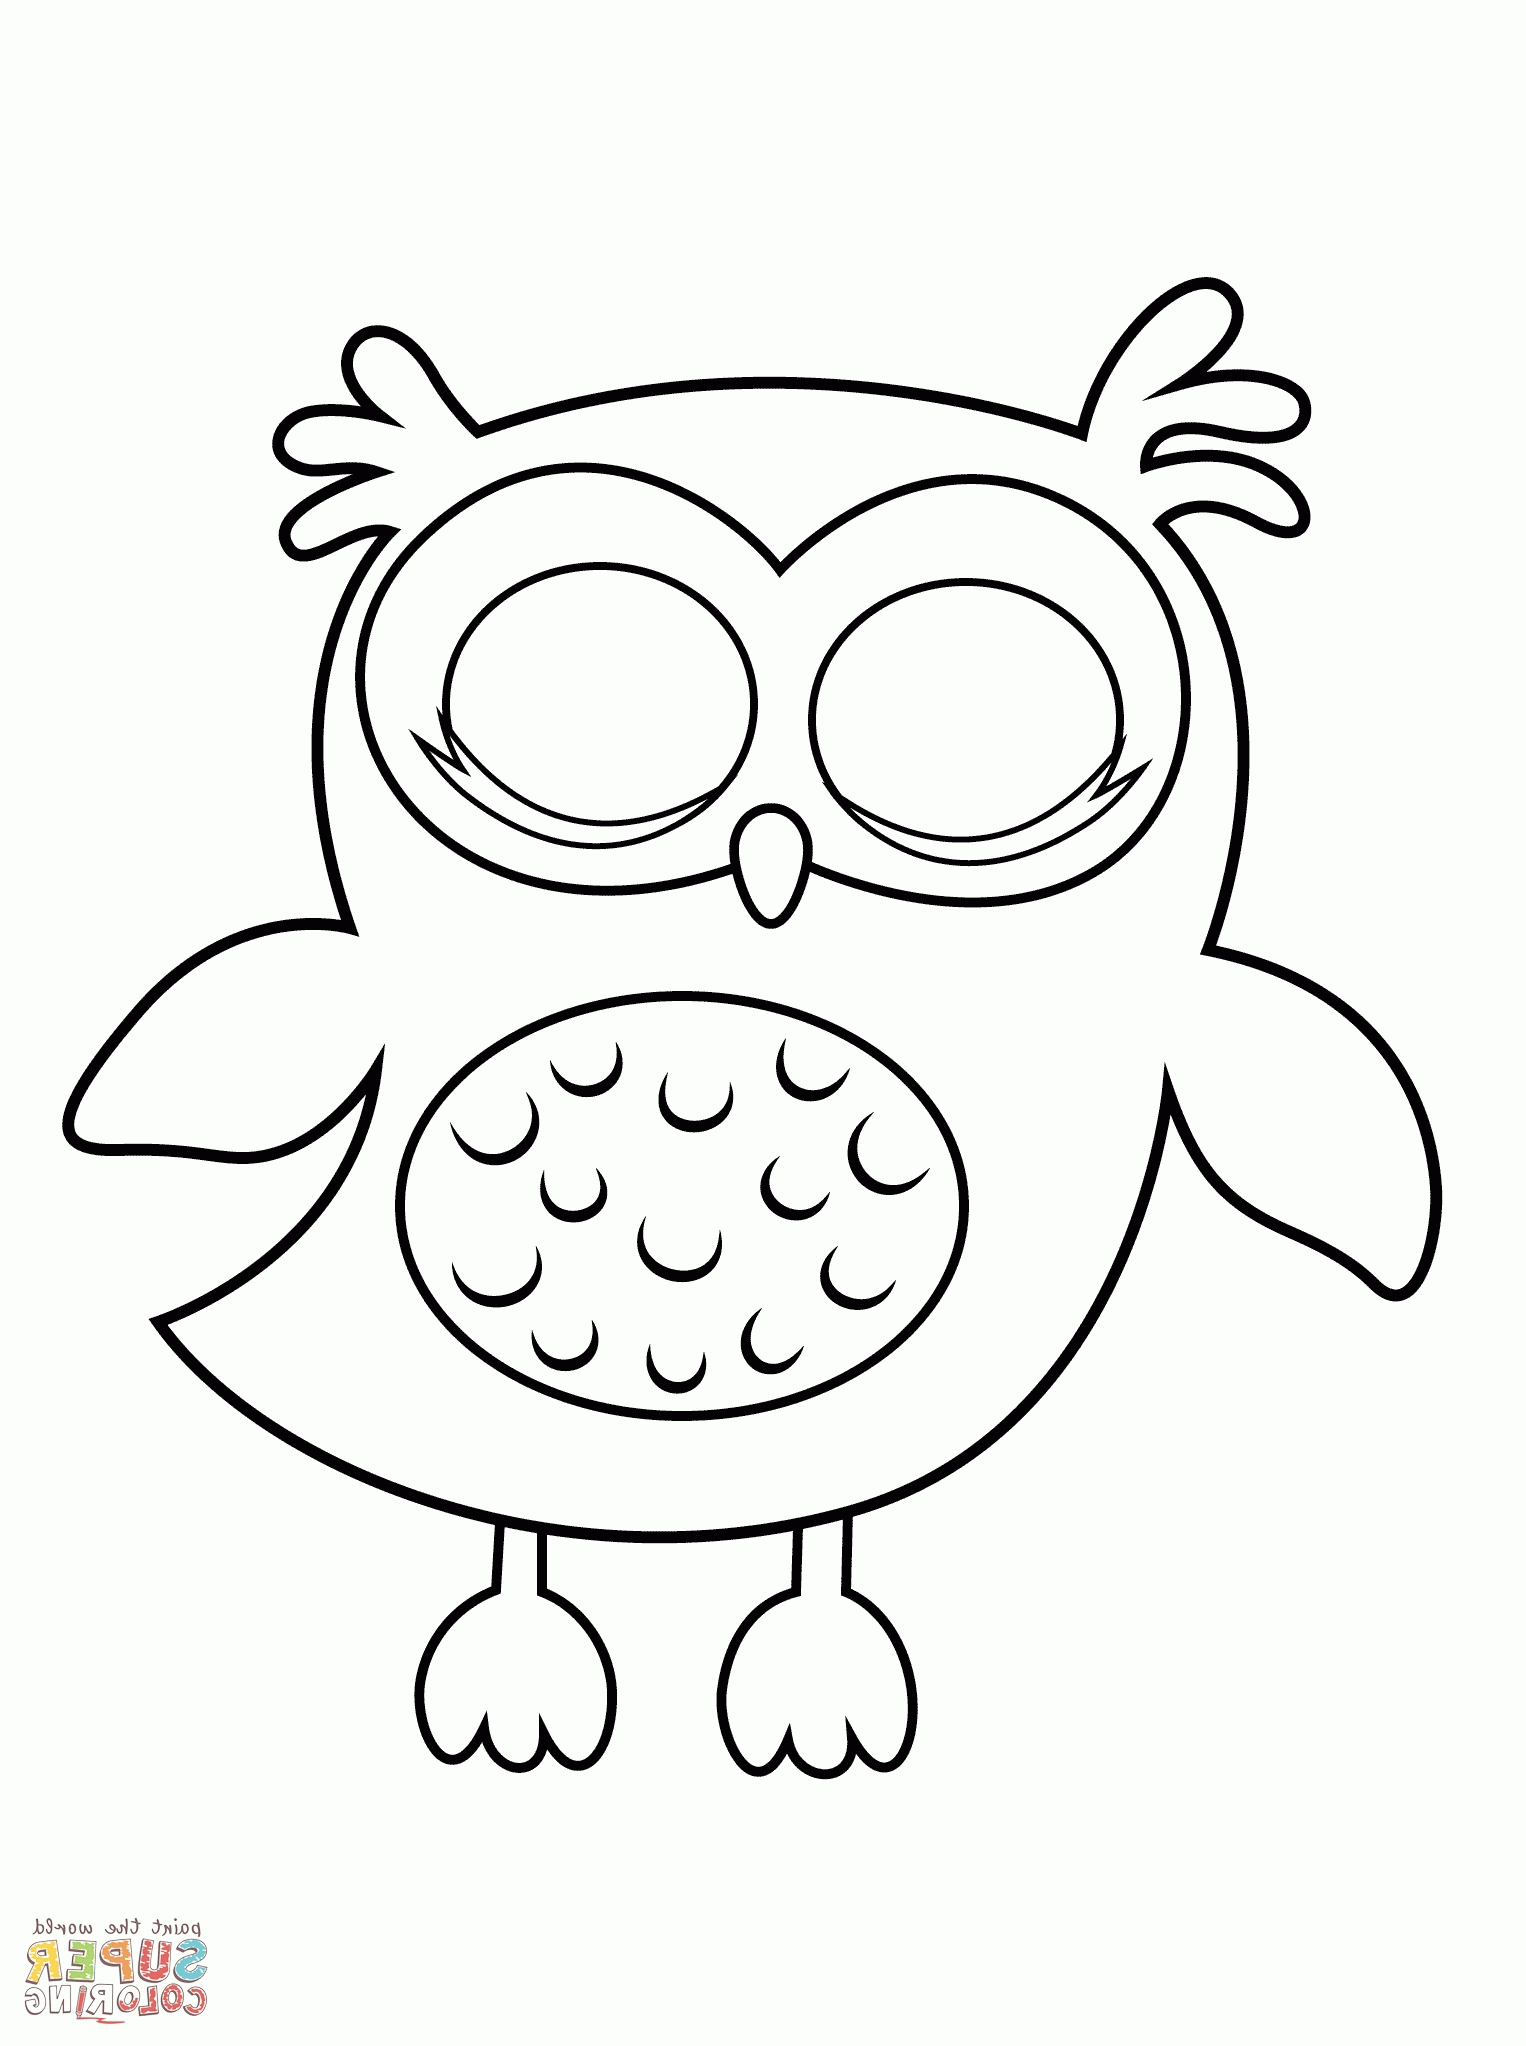 Owl Coloring Pages Preschool - Coloring Page Photos